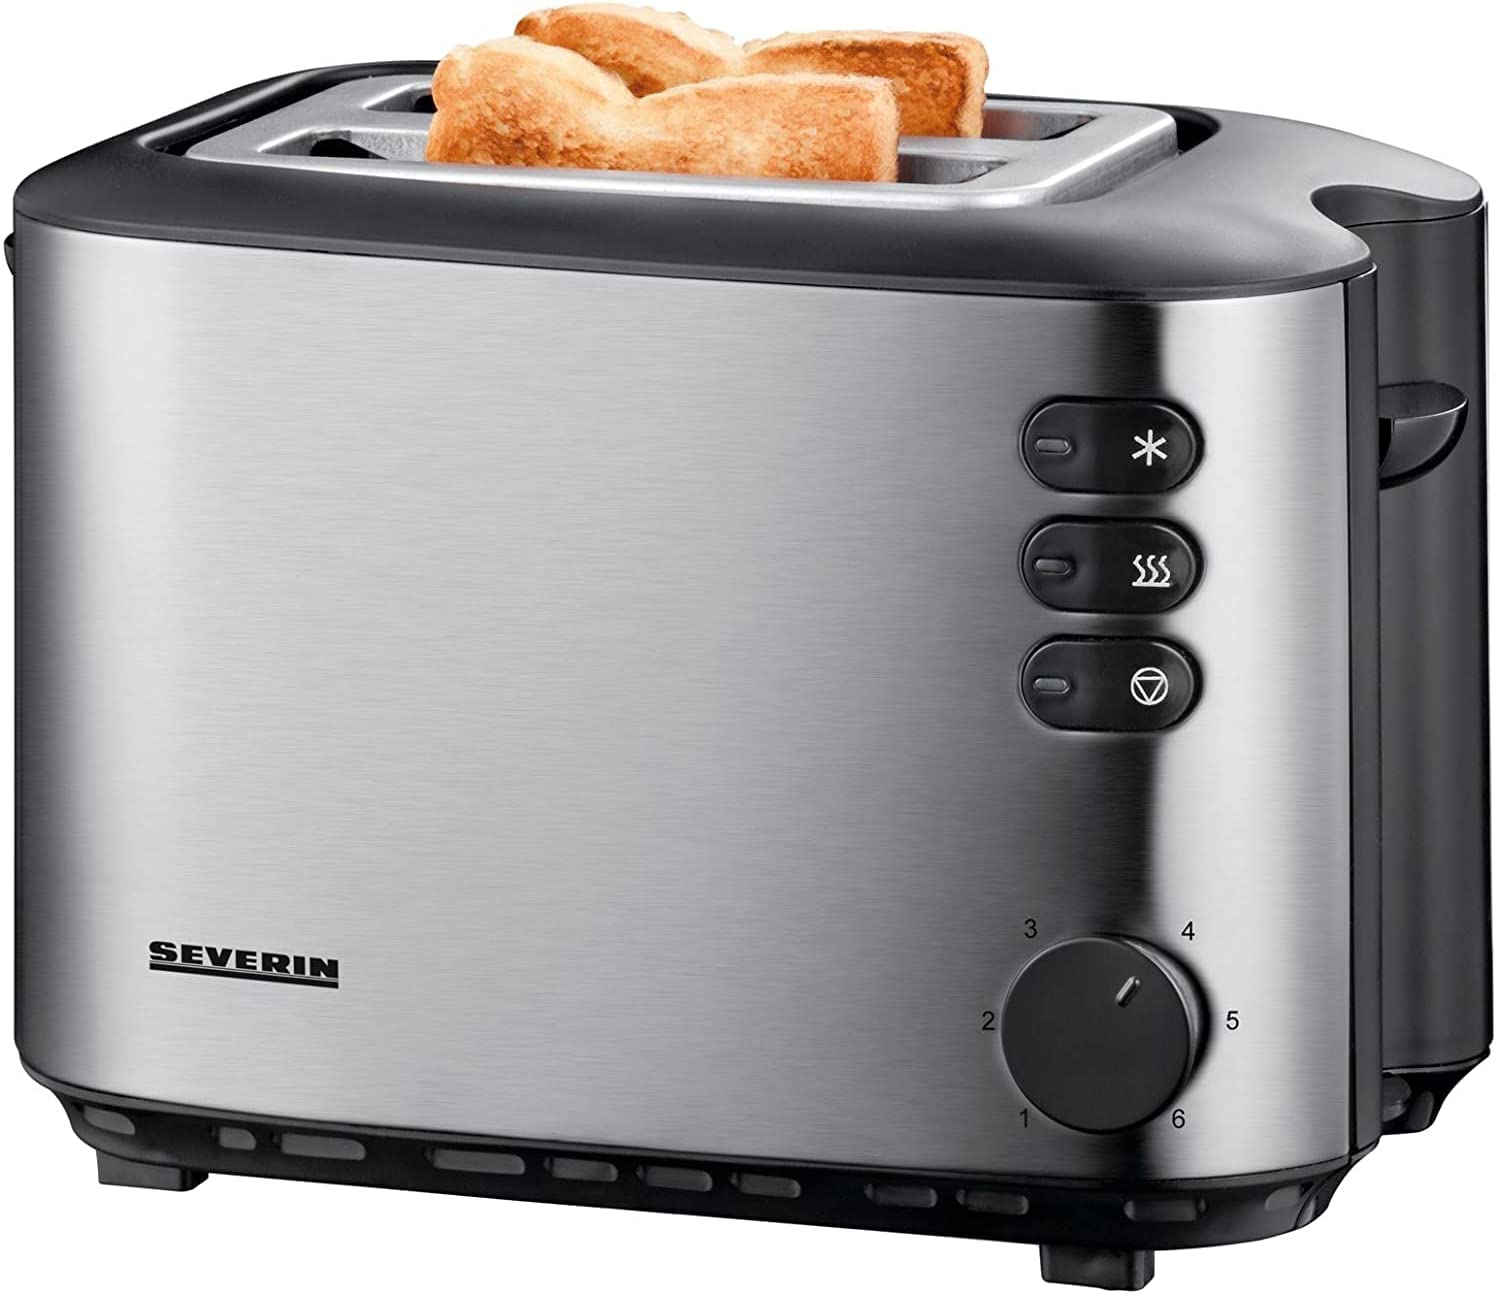 SEVERIN Automatic 2 Slice Toaster Toaster: Stainless Steel, 850W